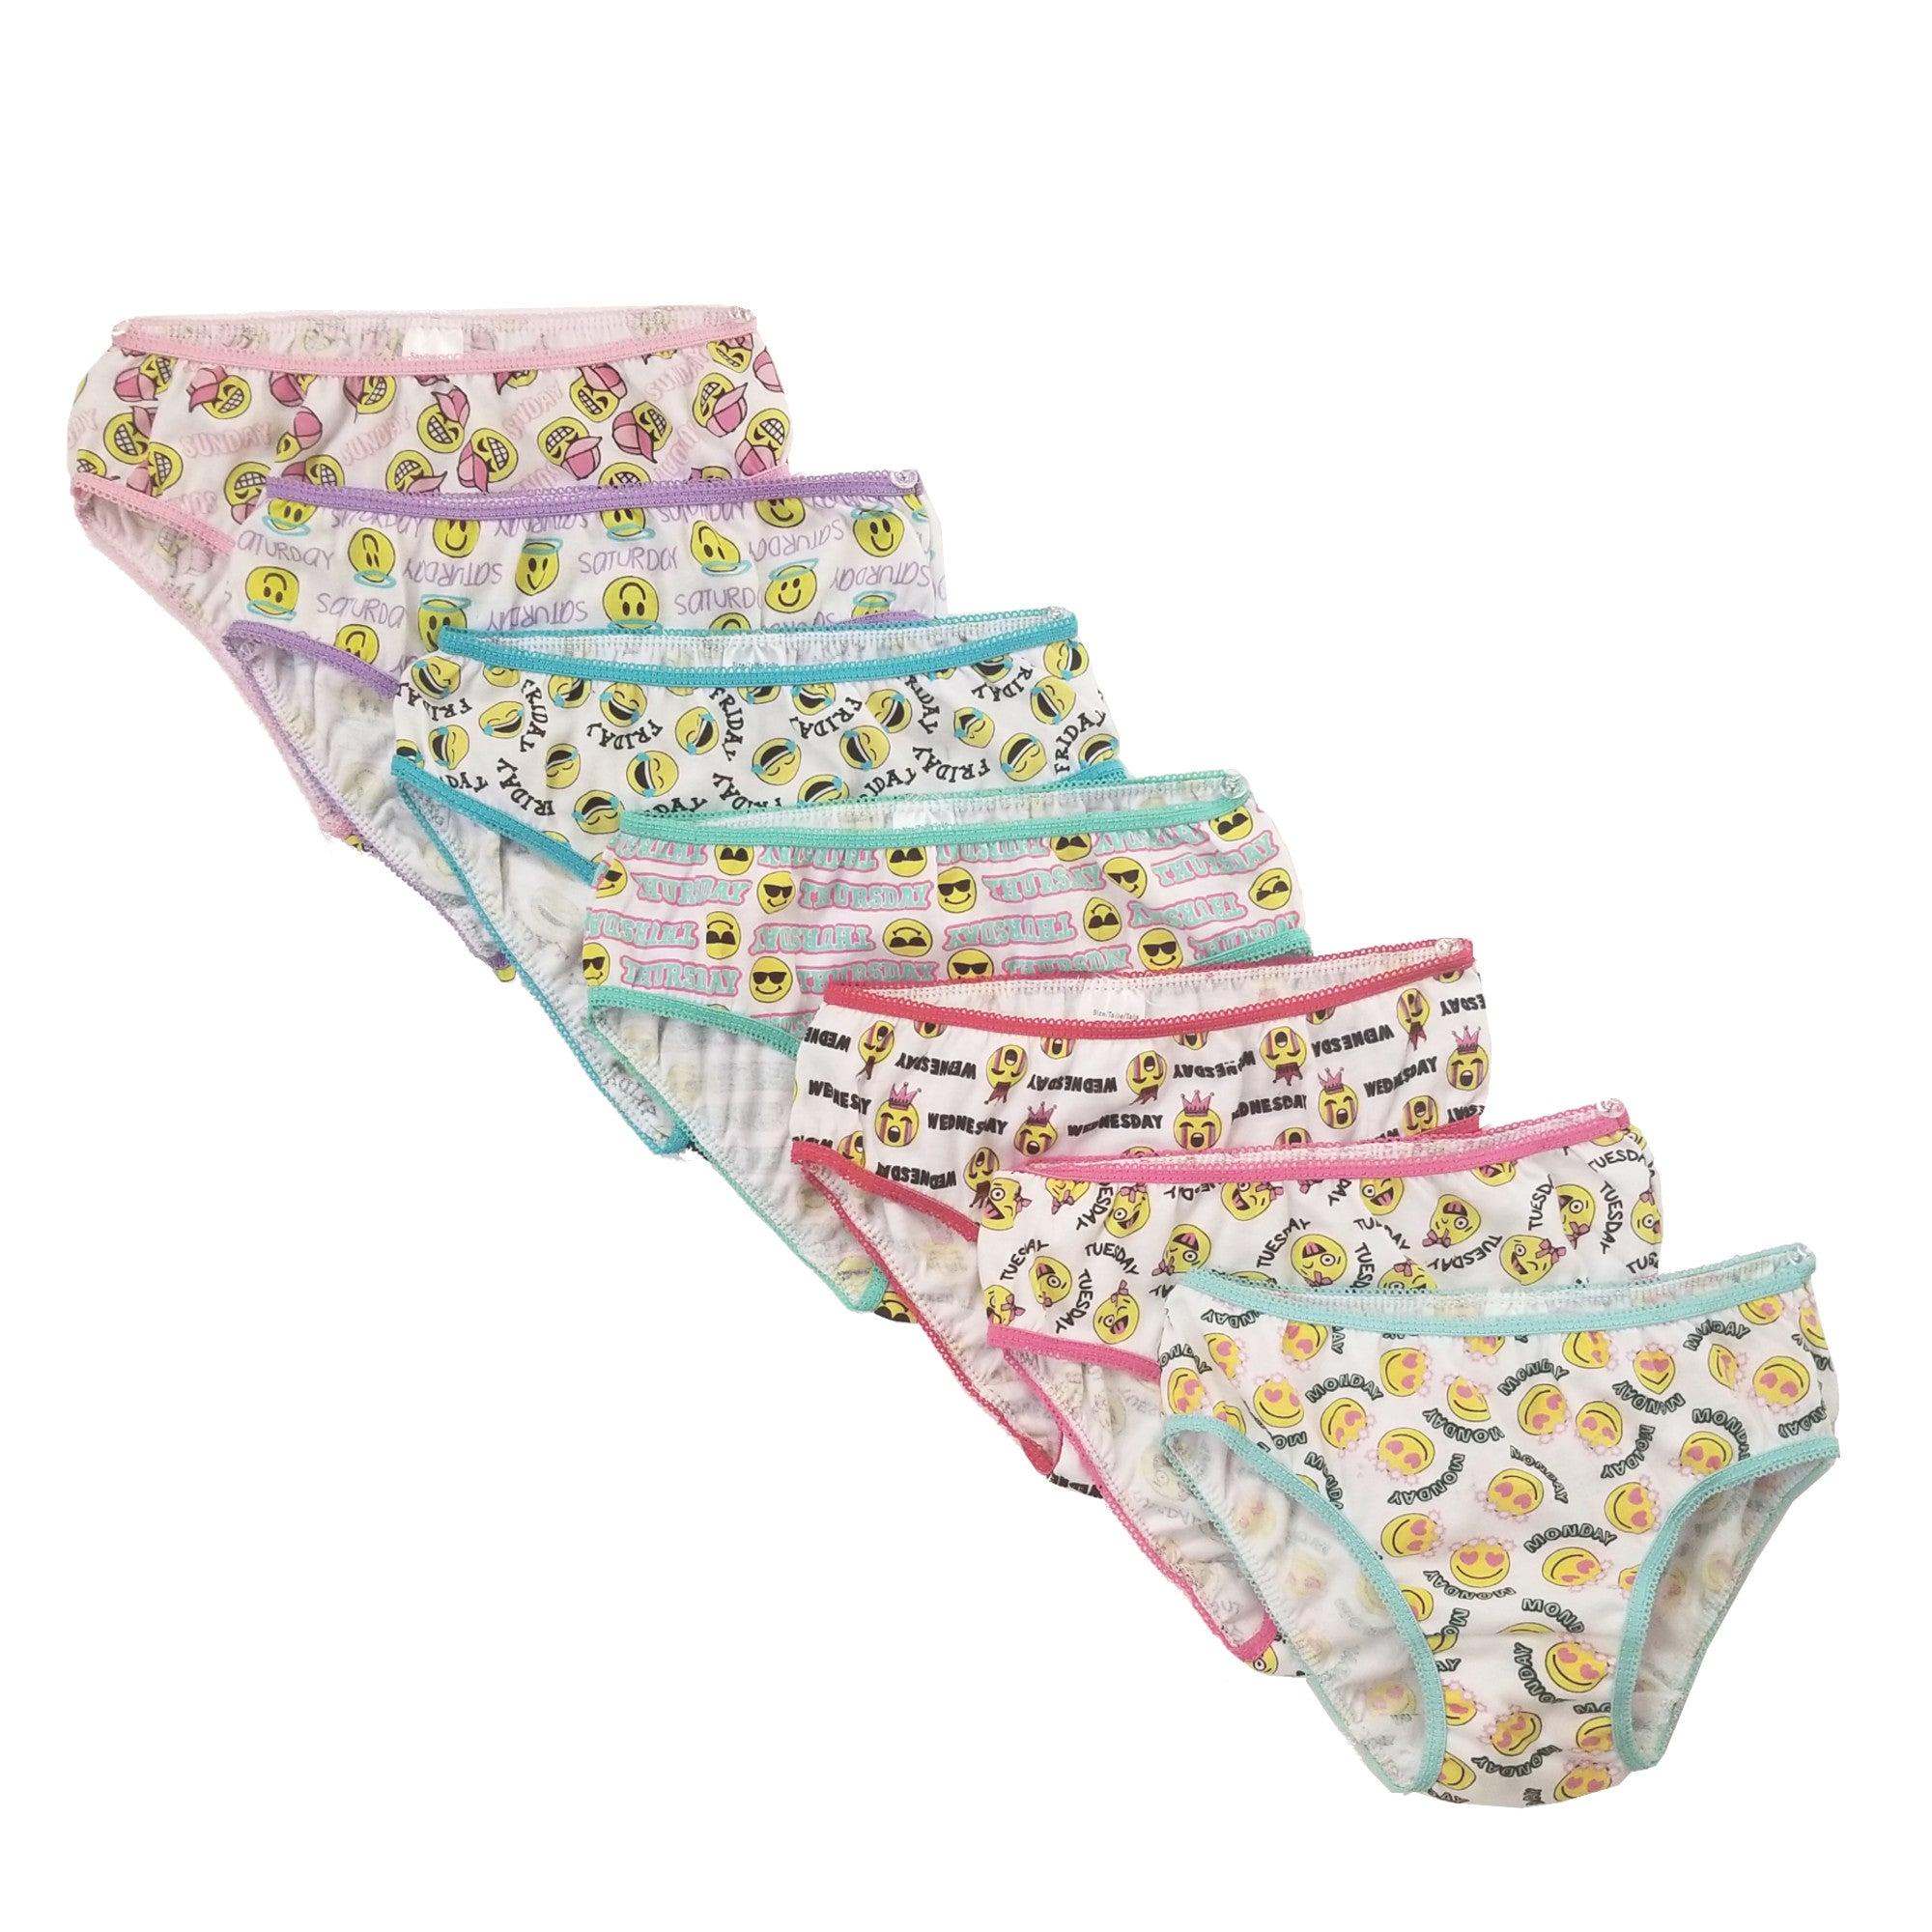 Popular Girls' Cotton Panty Underwear - Pack of 7 – The Popular Store